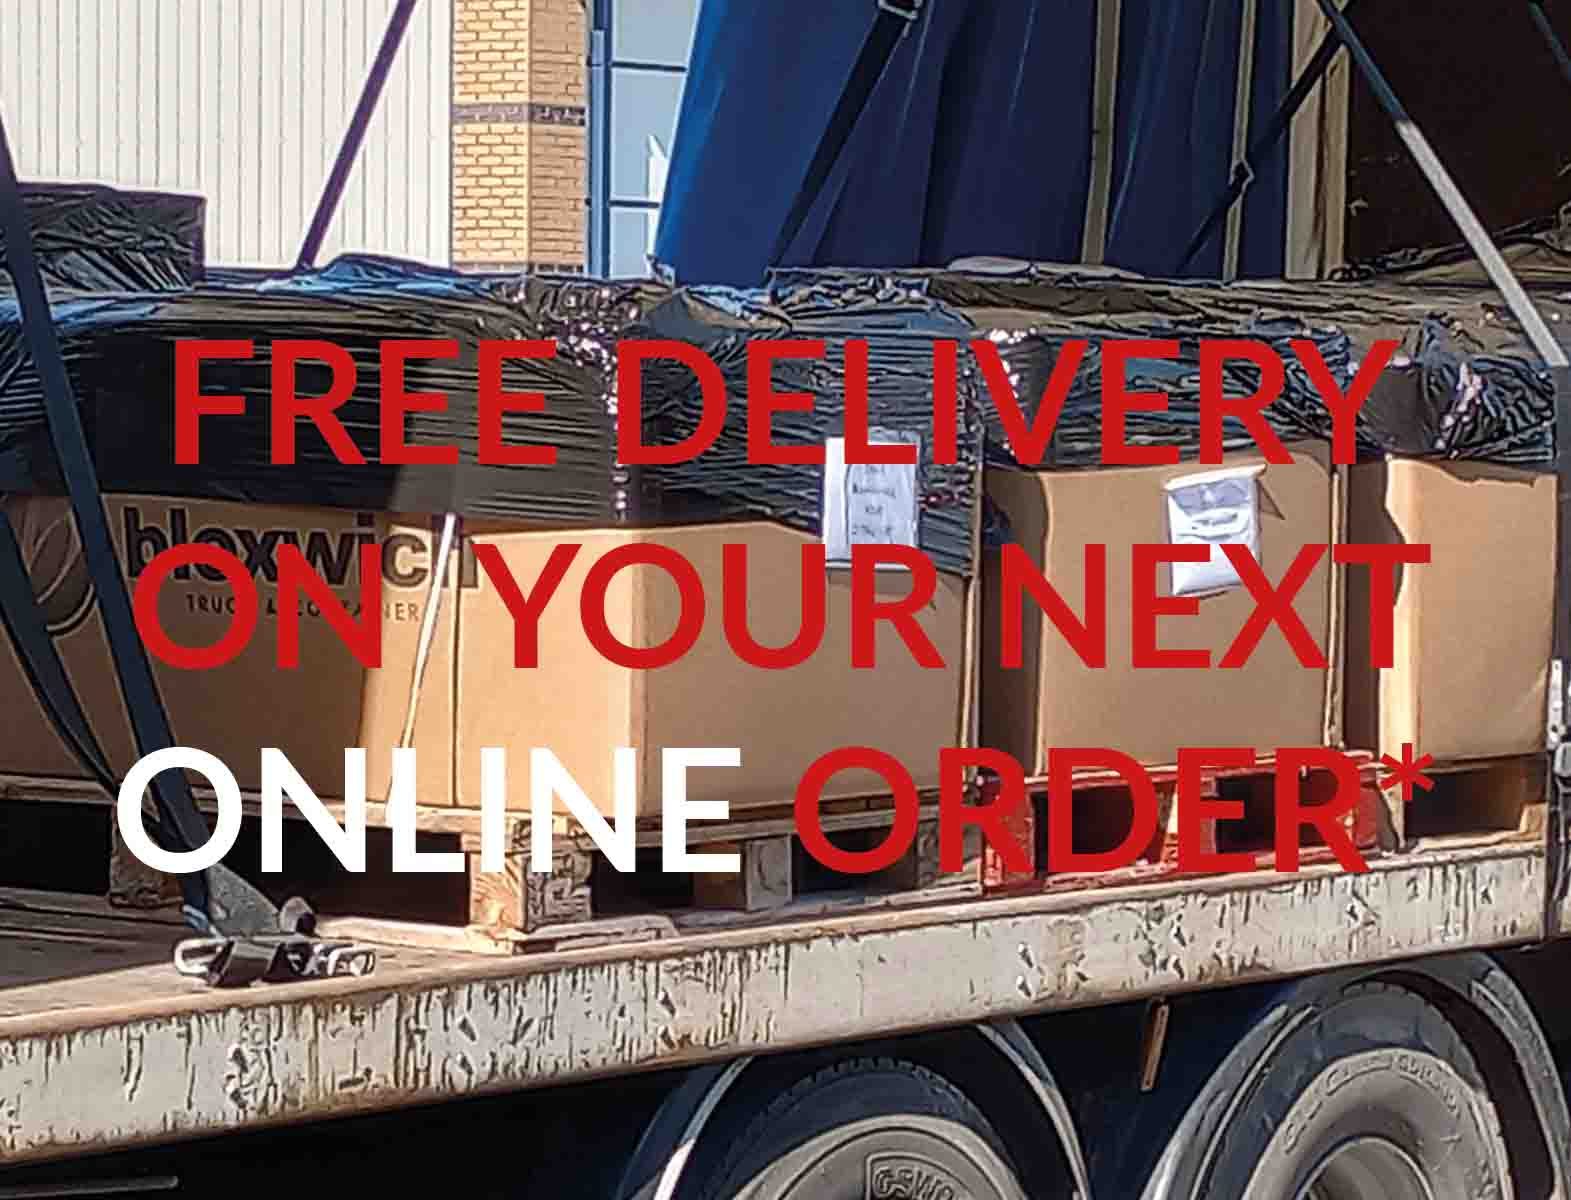 Free delivery on your next order